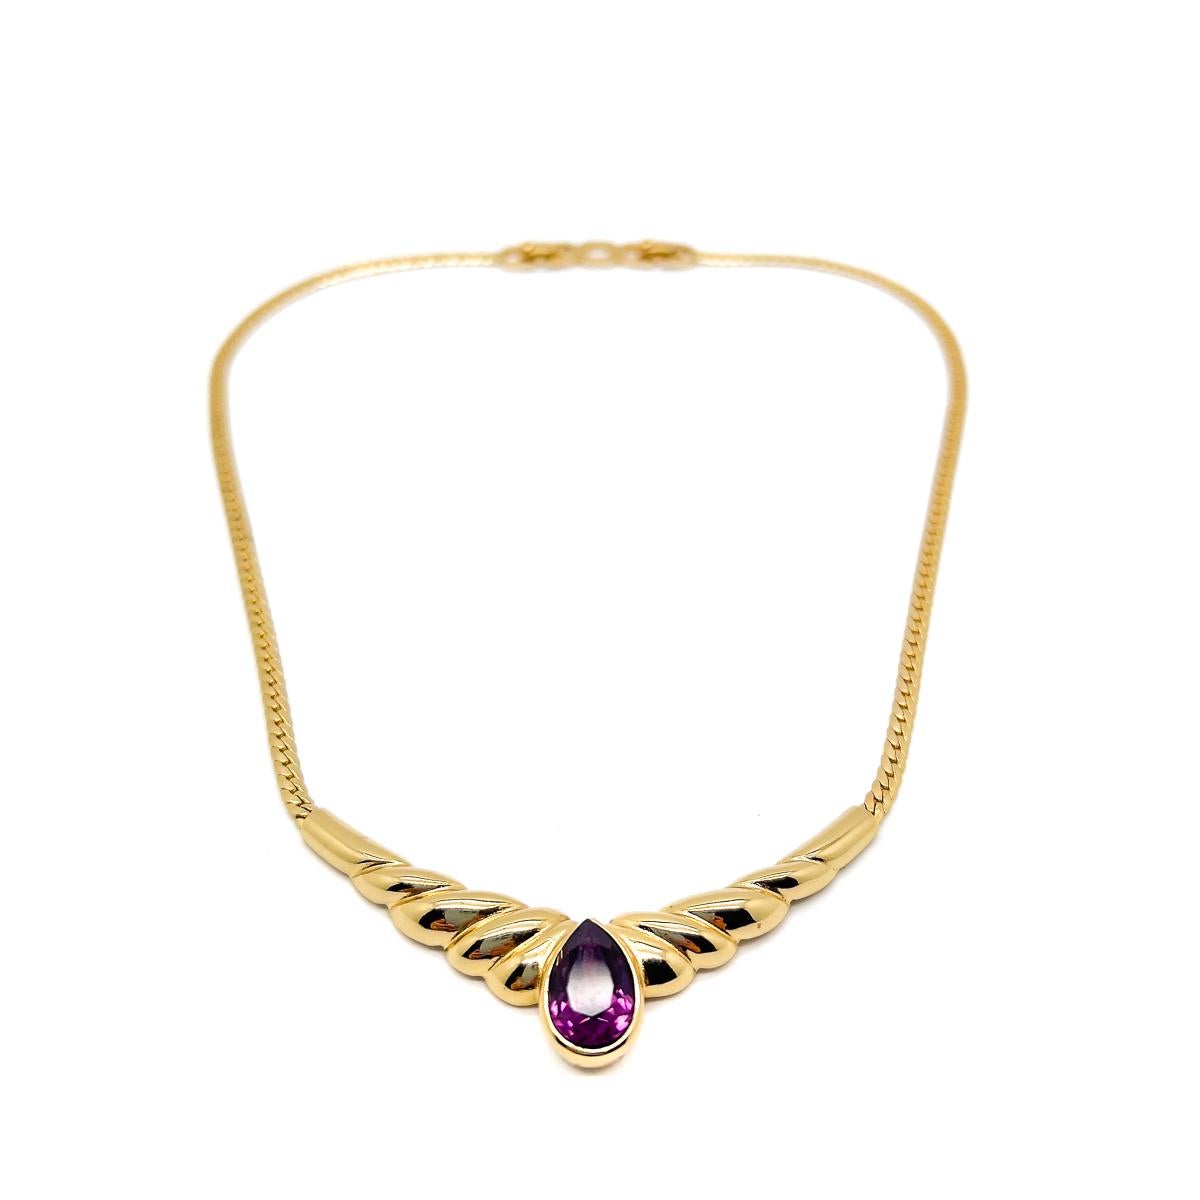 Vintage Christian Dior Amethyst Teardrop Necklace 1980s In Good Condition For Sale In Wilmslow, GB